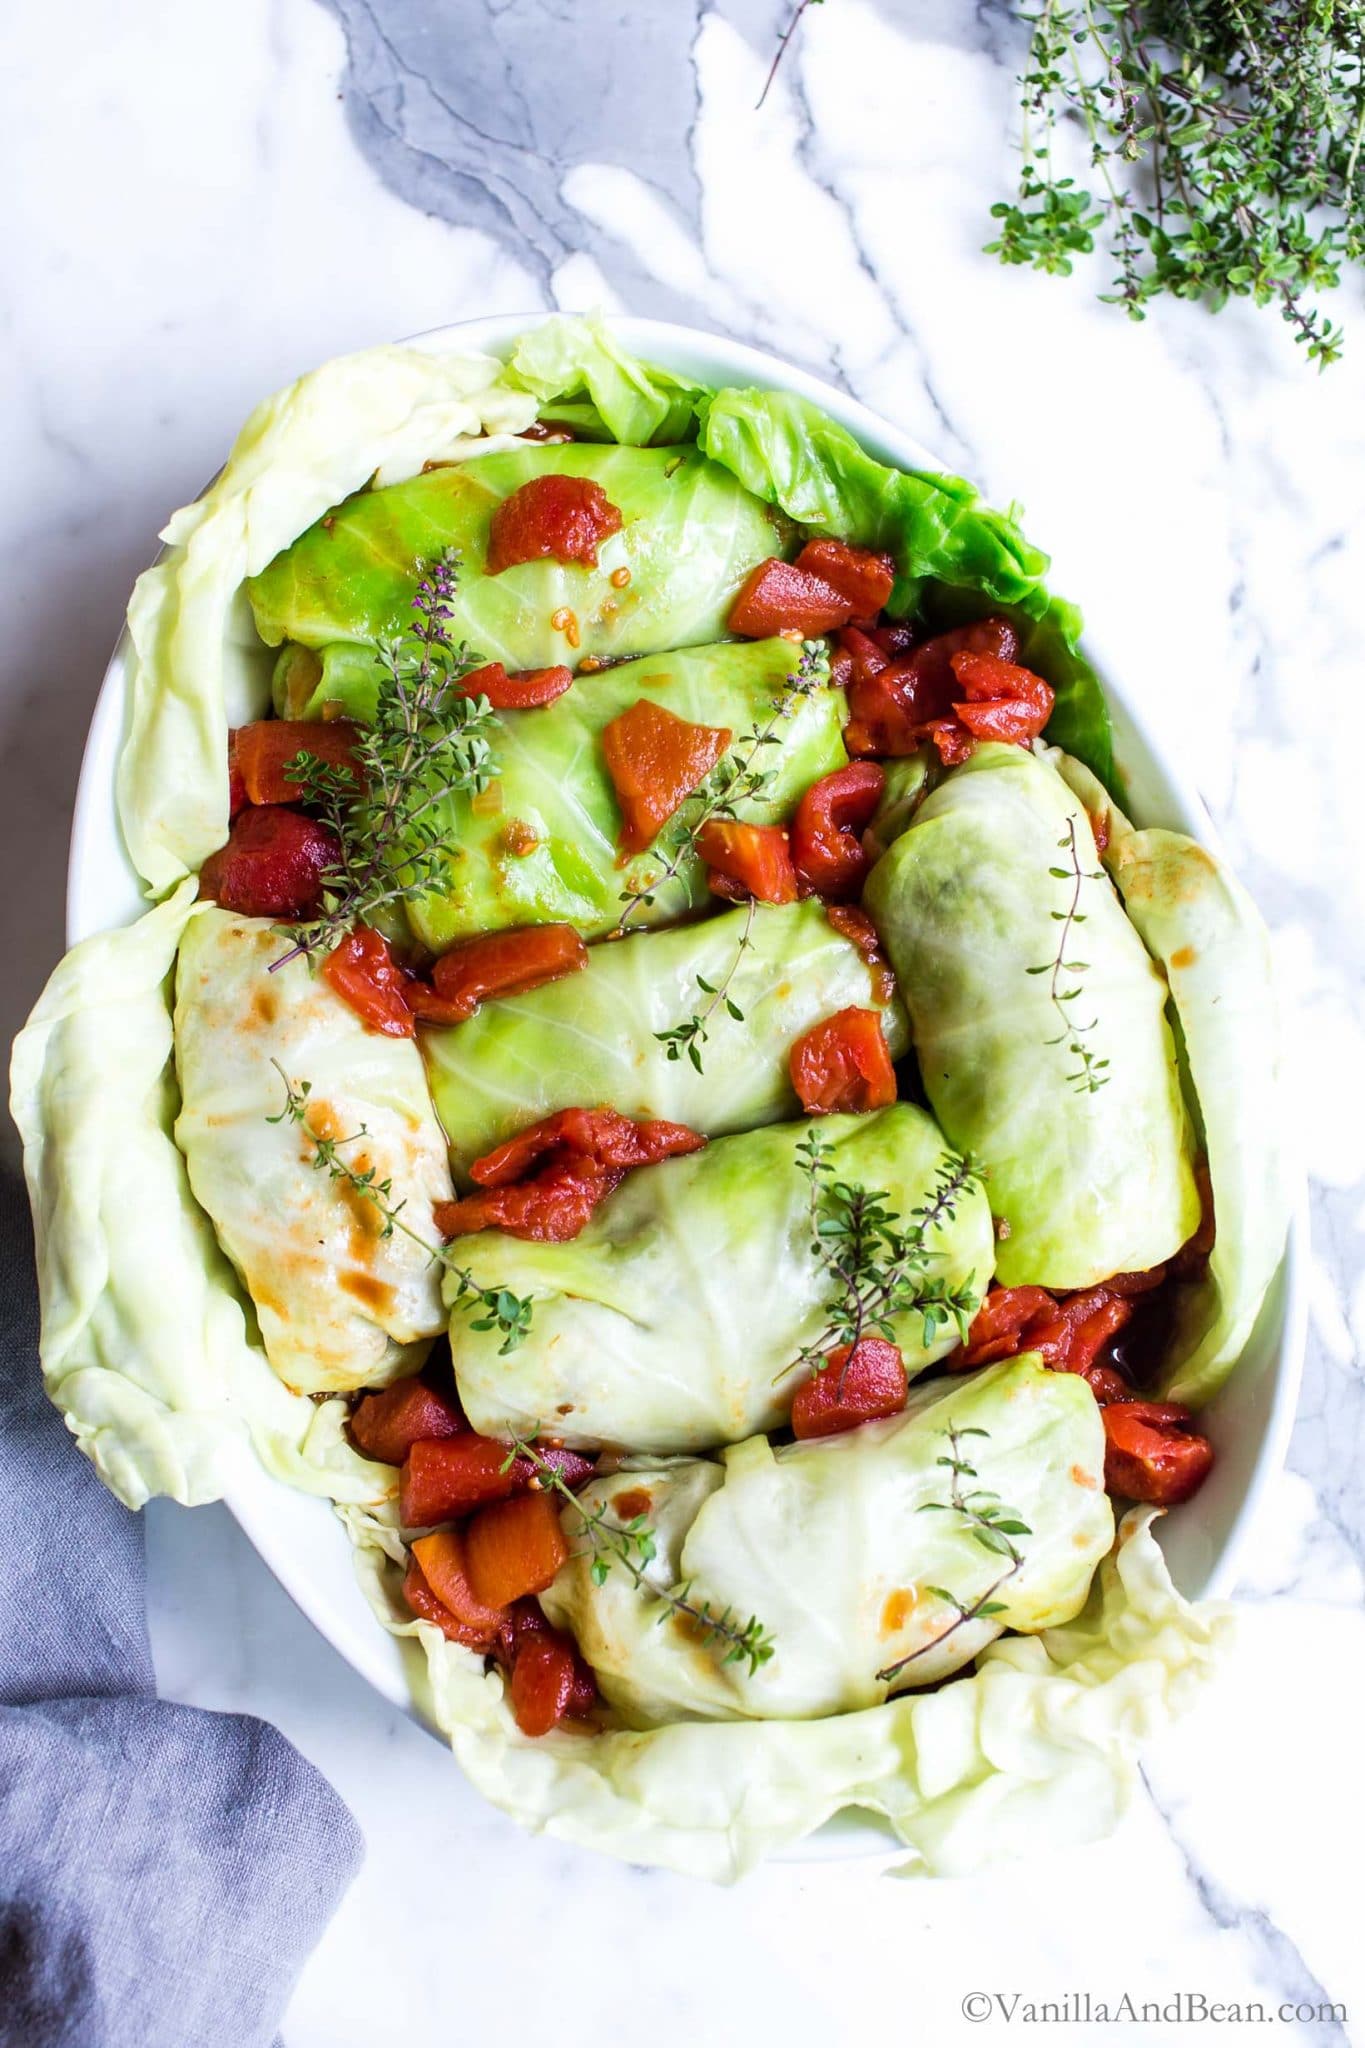 Vegan cabbage rolls in a baker ready to bake.